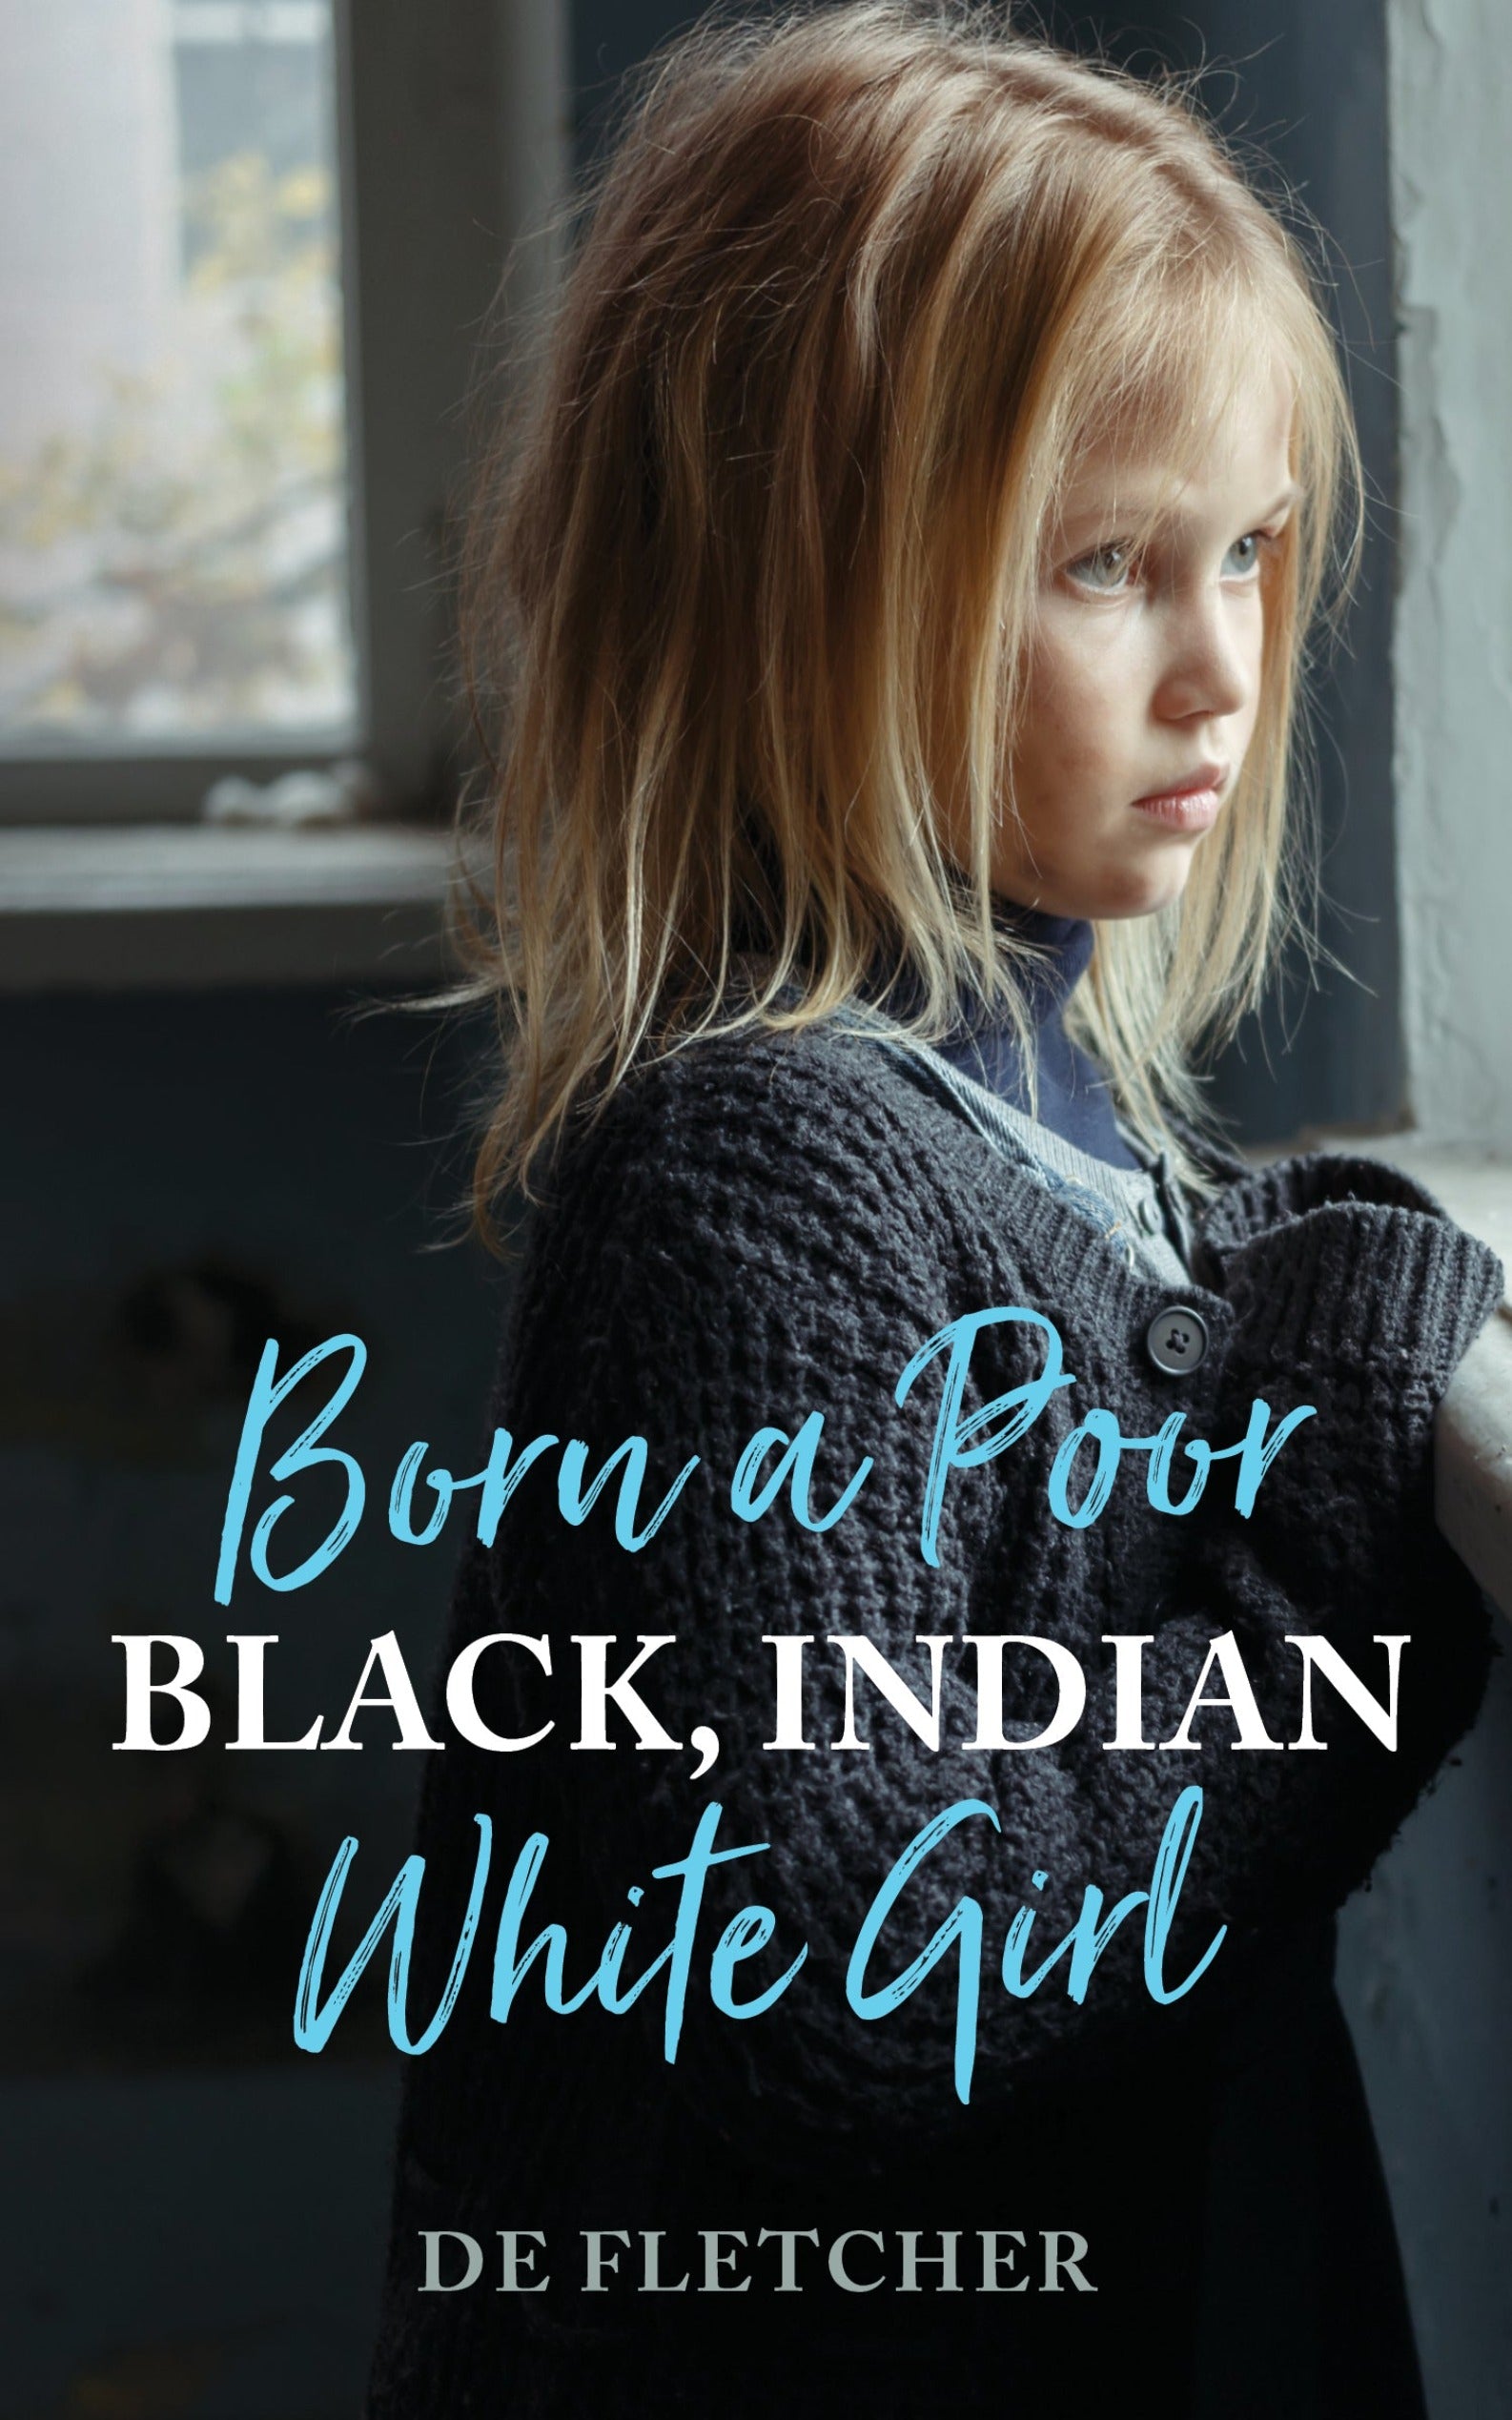 This is the cover image of "Born a Poor, Black, Indian, White Girl". A young girl, dressed in worn-out clothes, stares out a window of a dilapidated house. She appears to be wishing or hoping for something.